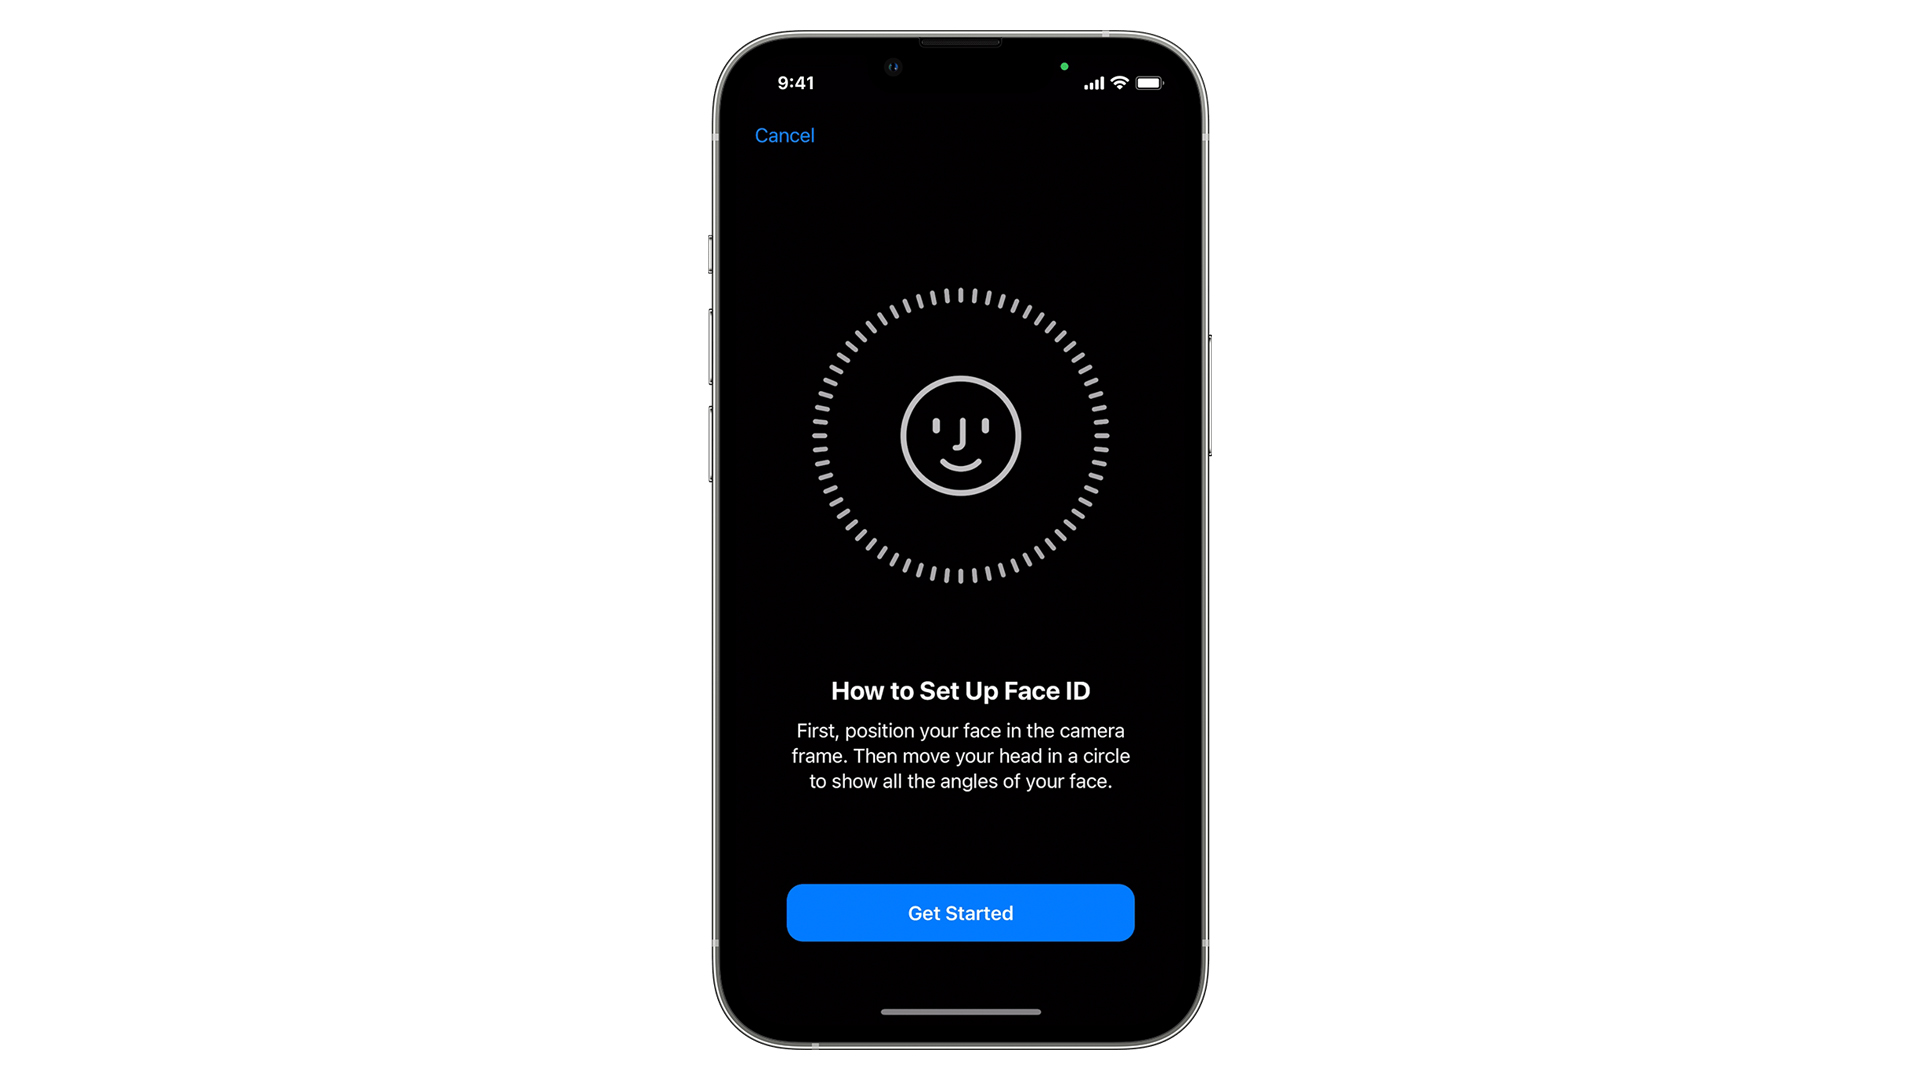 Setting up Face ID on an iPhone